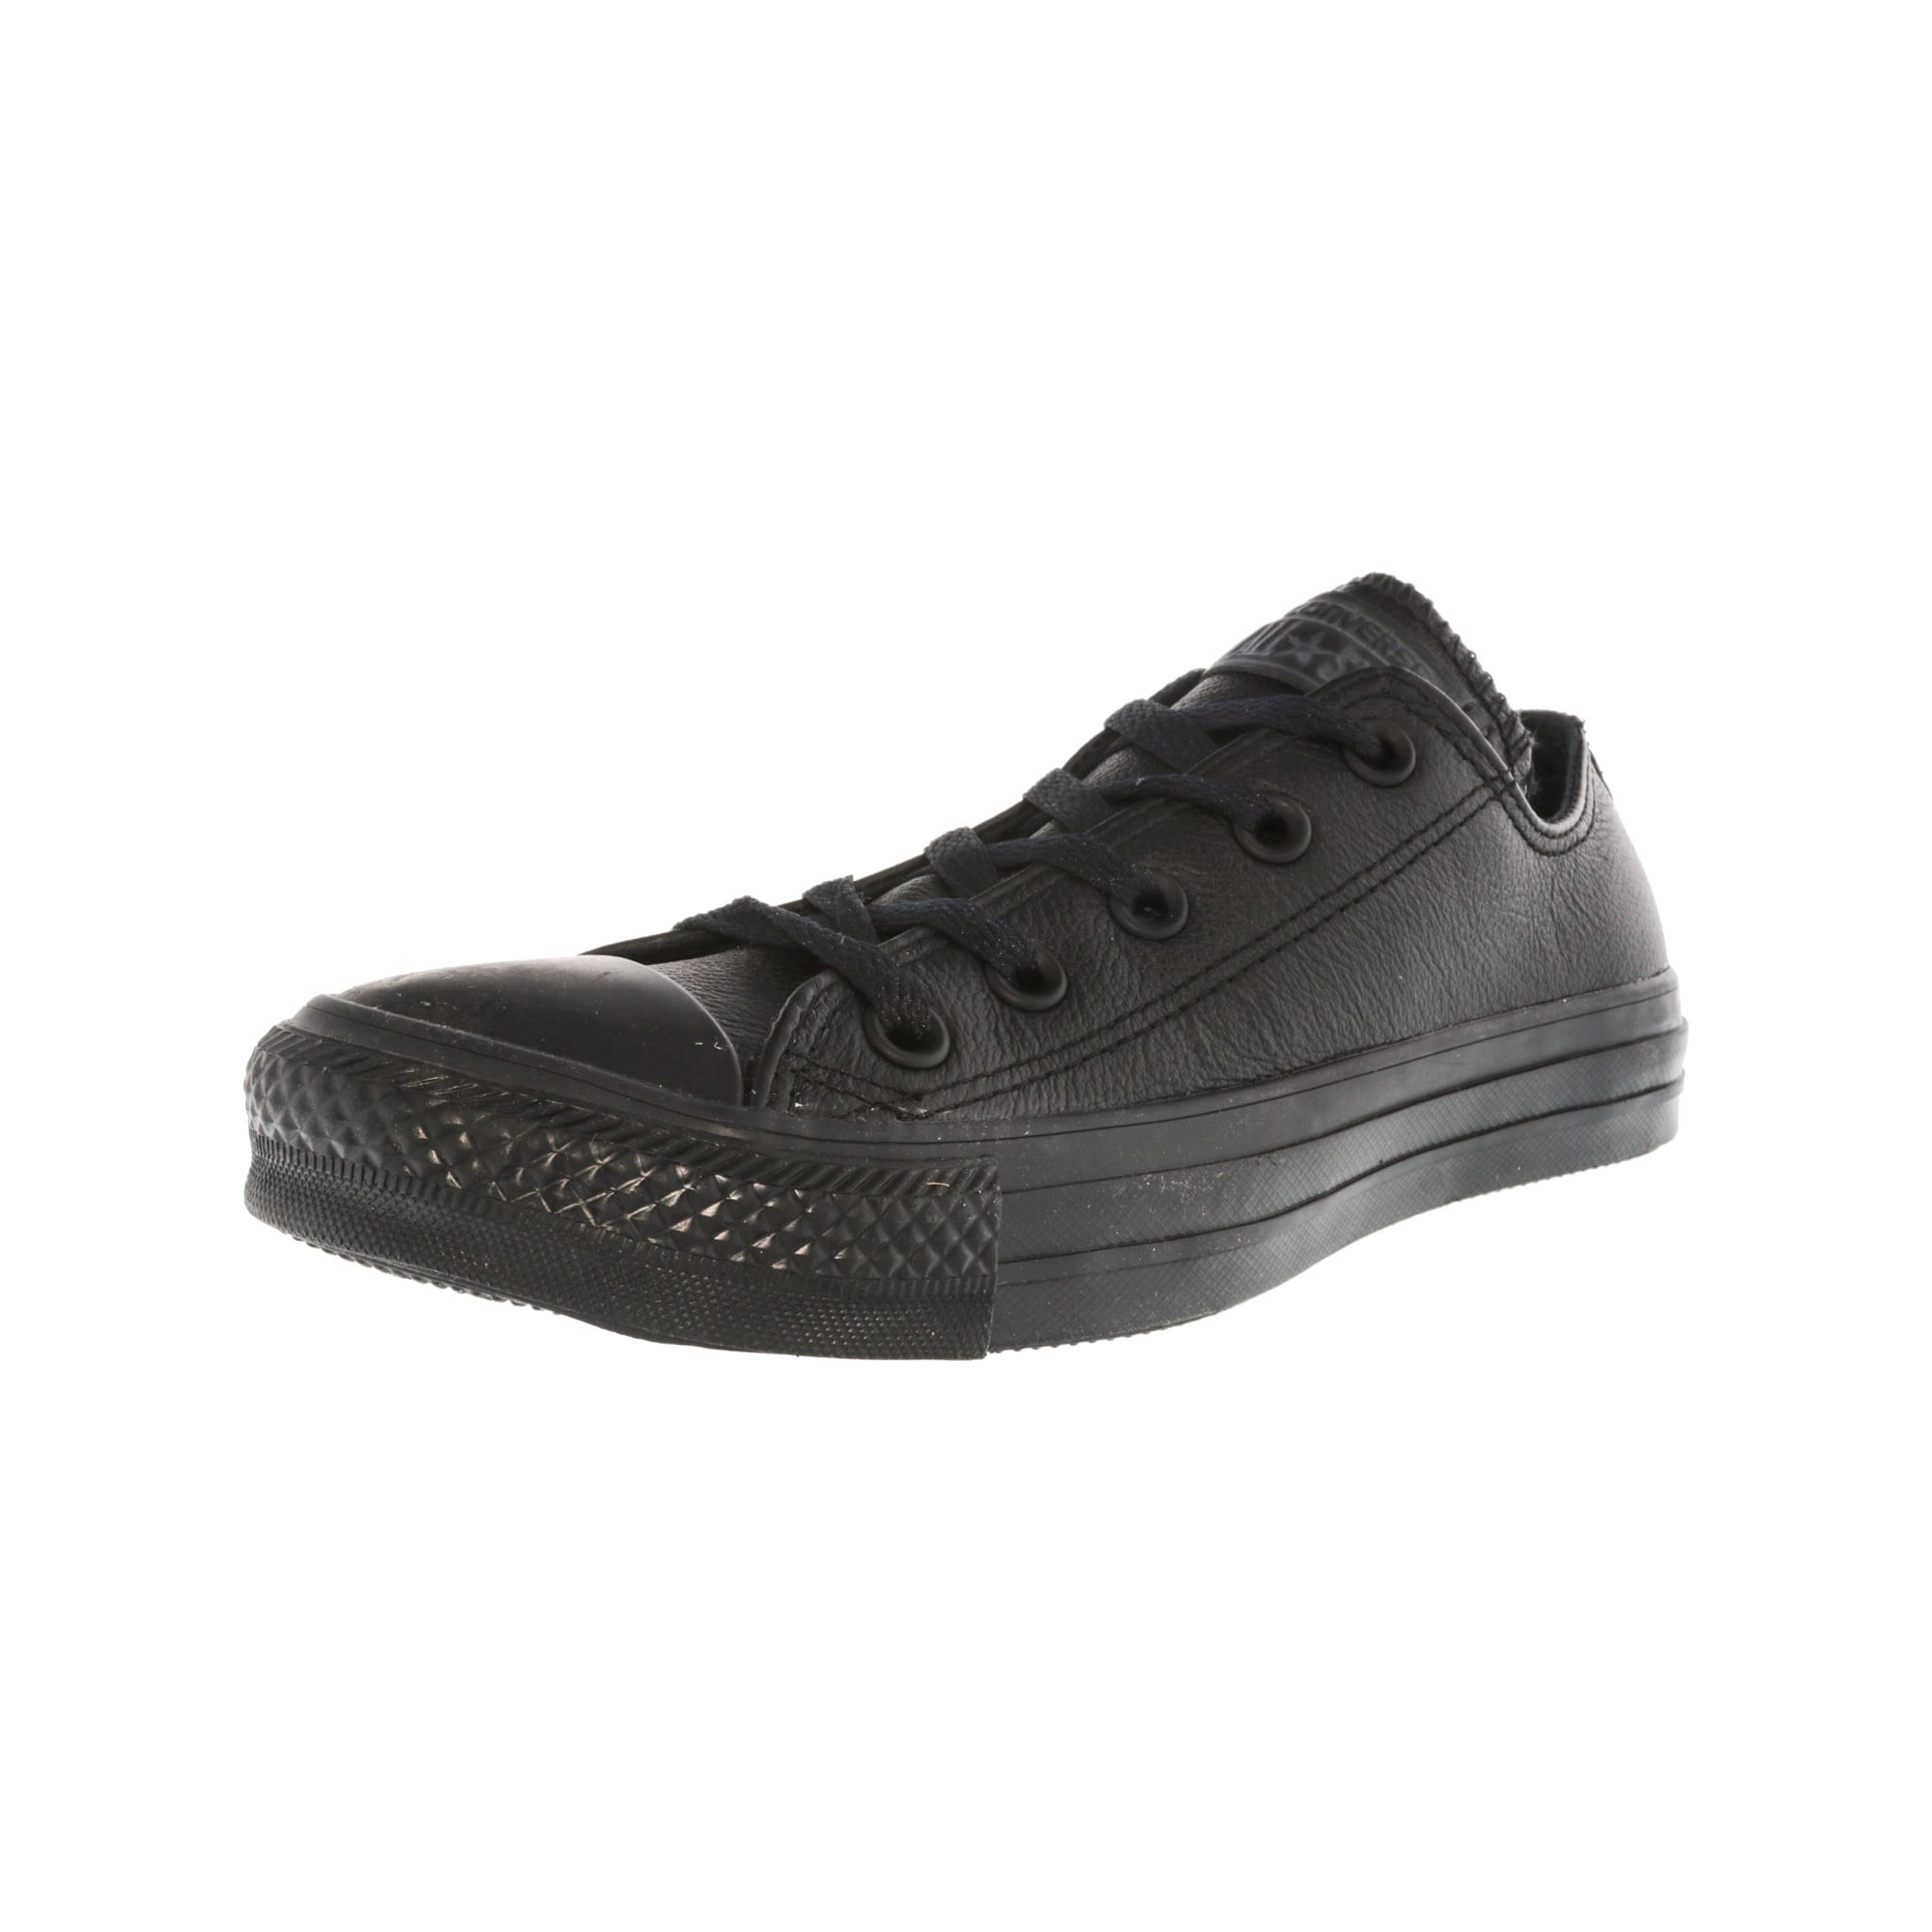 hoste Absay Usikker Converse Women's Chuck Taylor All Star Ox Black Mono Ankle-High Canvas  Fashion Sneaker - 5.5M | Walmart Canada